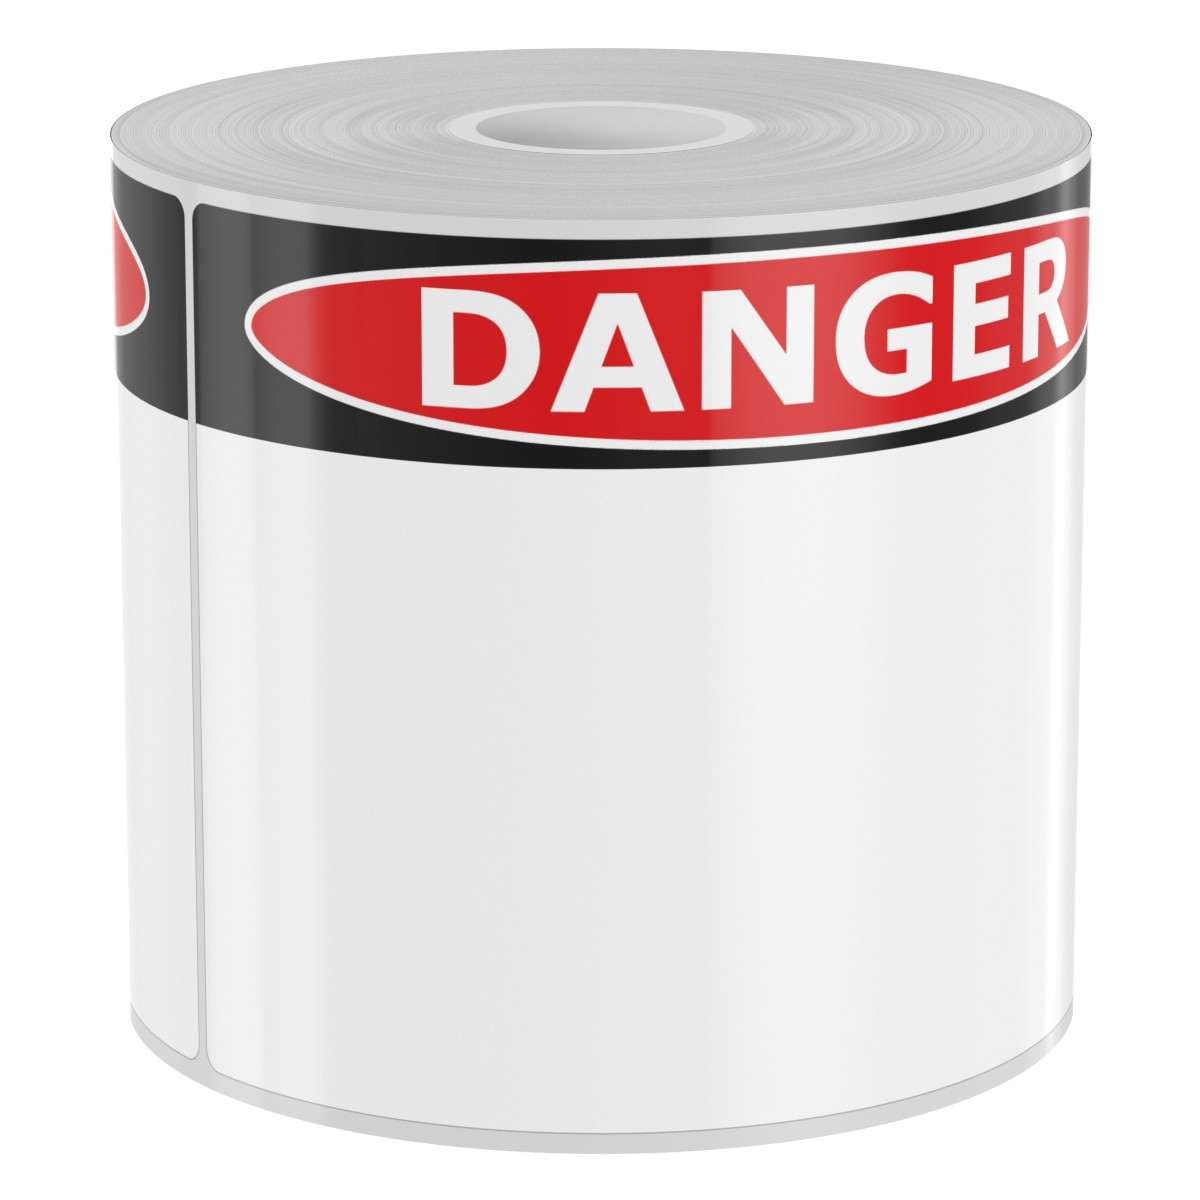 Detail view for 250 4" x 6" High-Performance Die-Cut OSHA Danger Labels